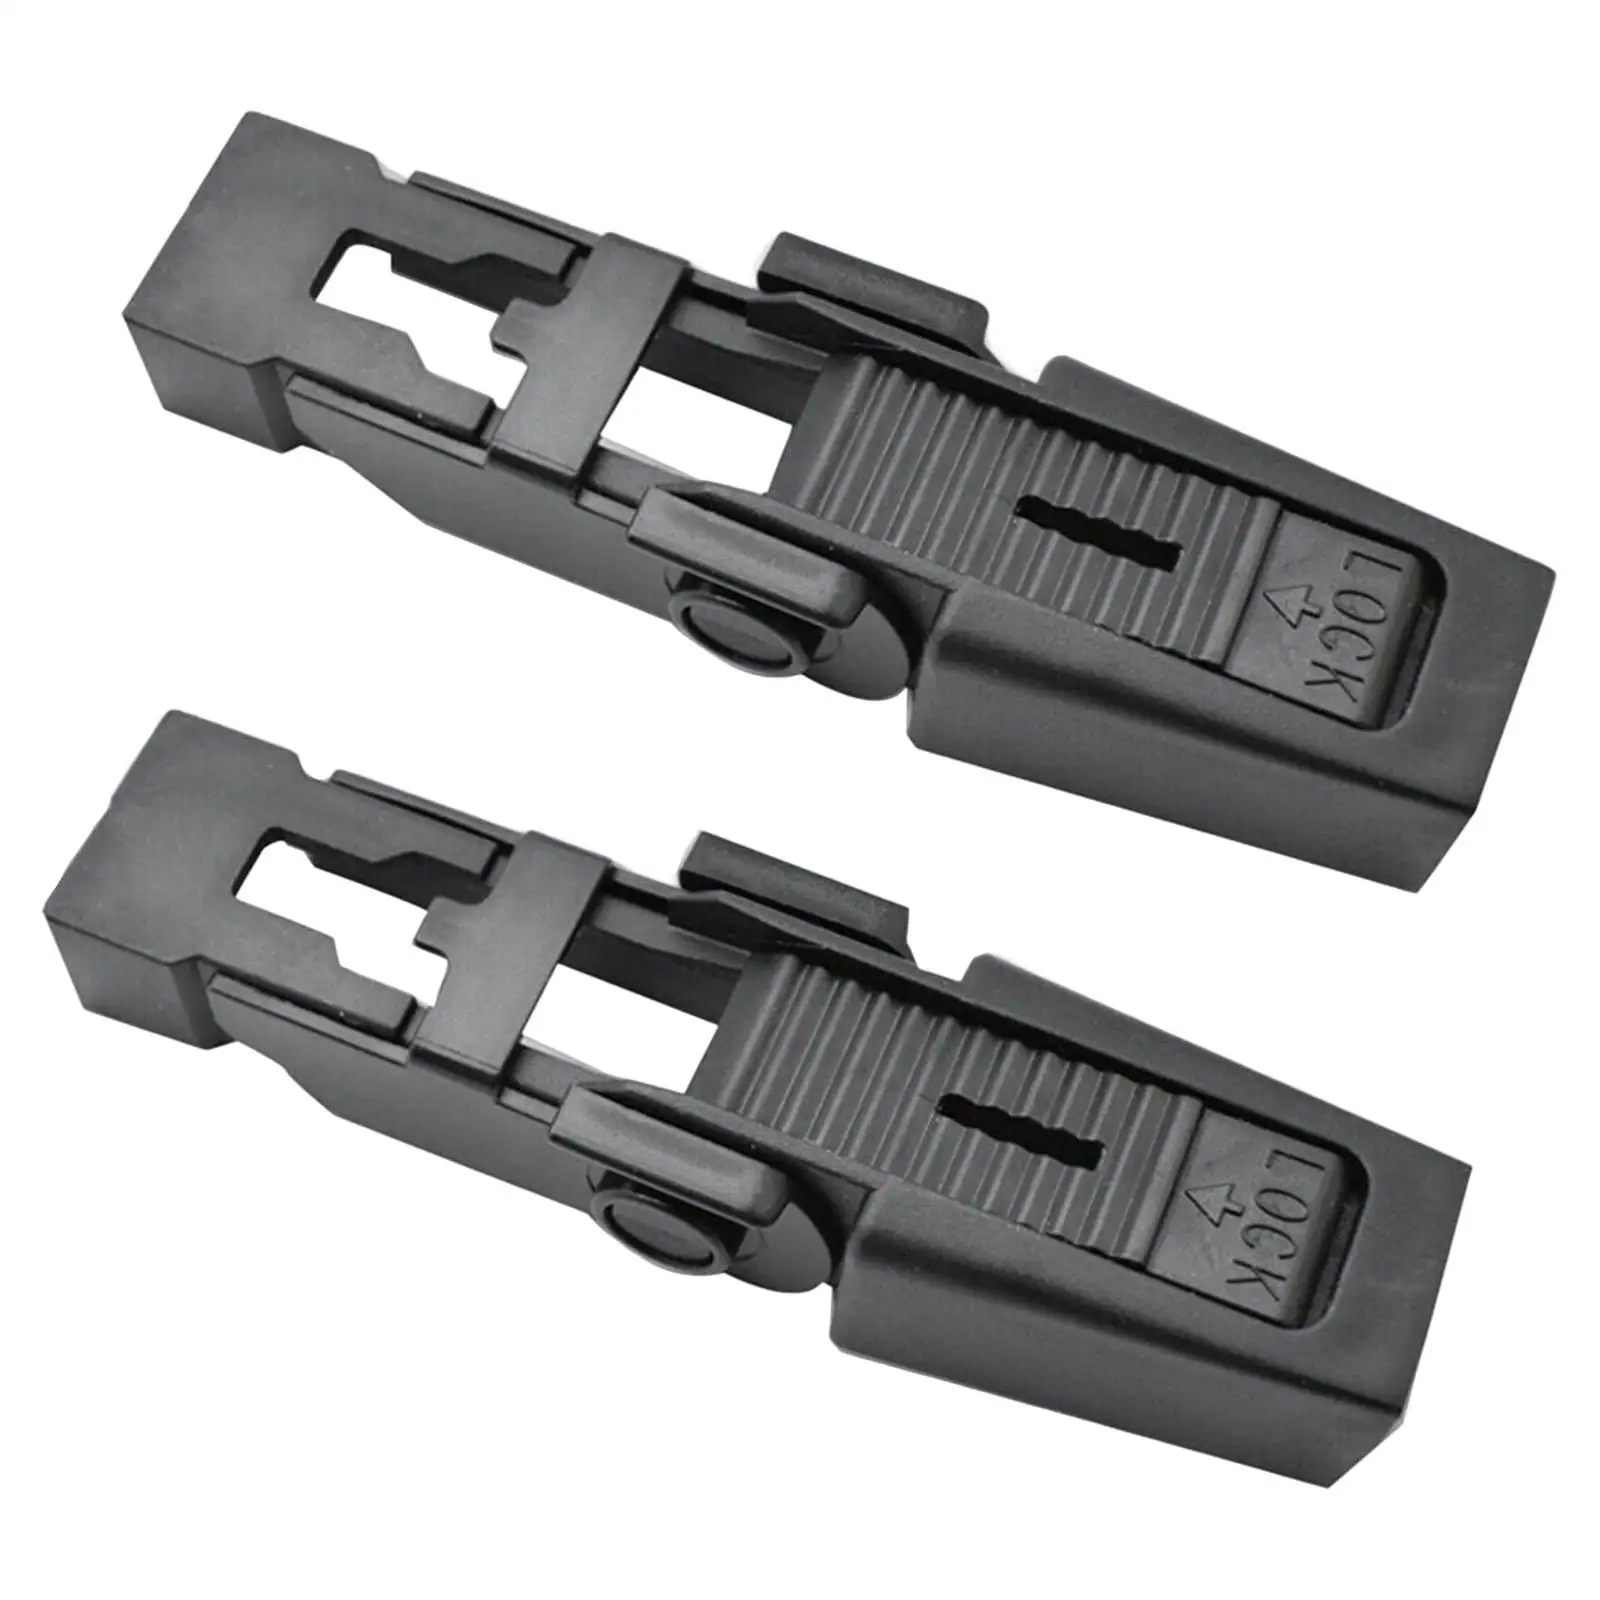 2Pcs Auto Front Windshield Wiper Clip Dkw100020 Black for Land Rover Discovery 2 Installation Accessories